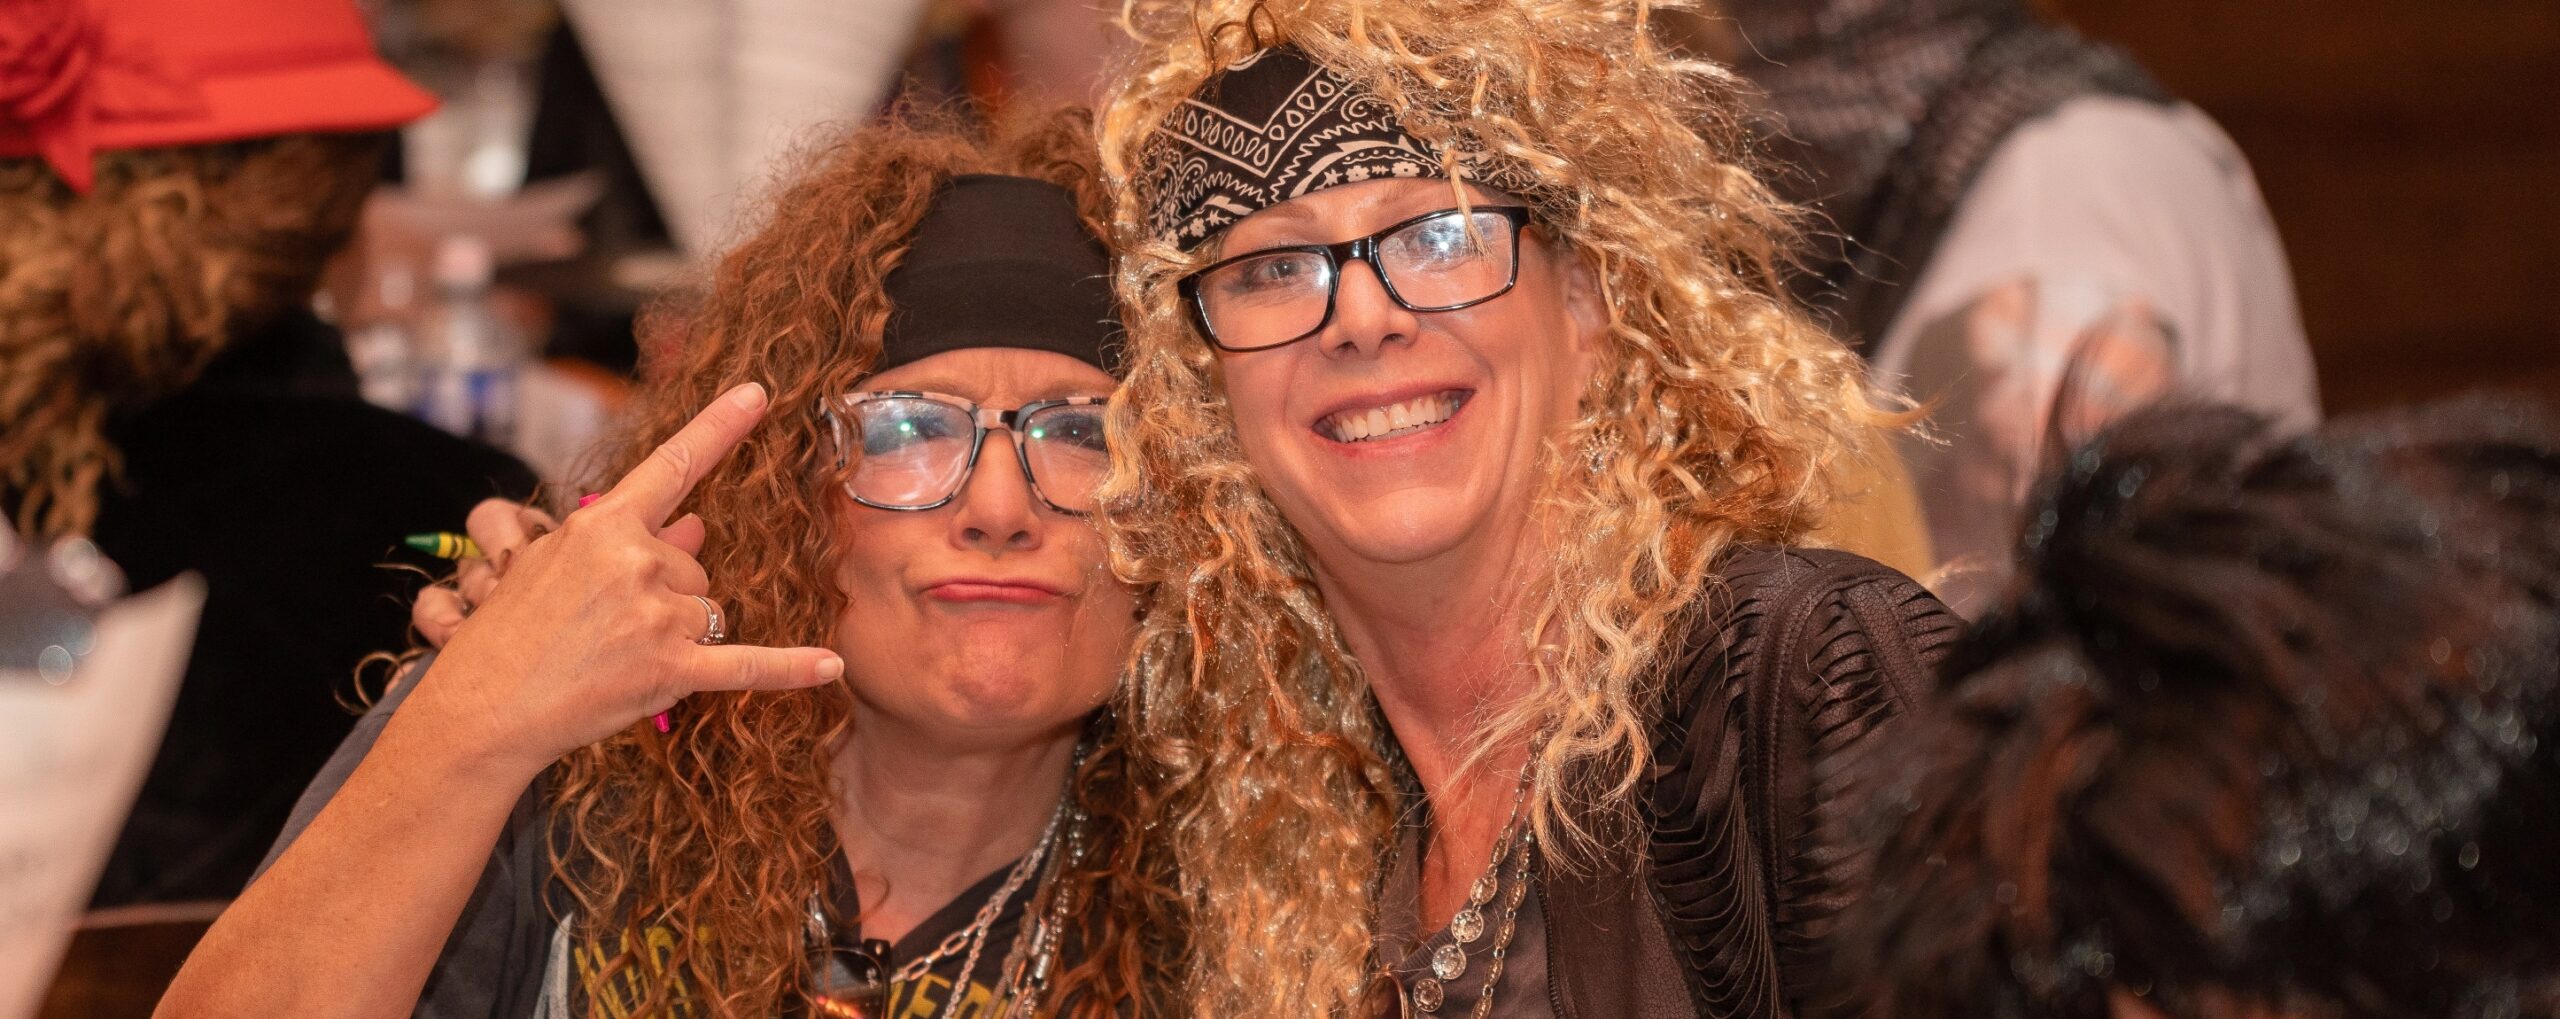 Two women with wigs and glasses posing for a photo.